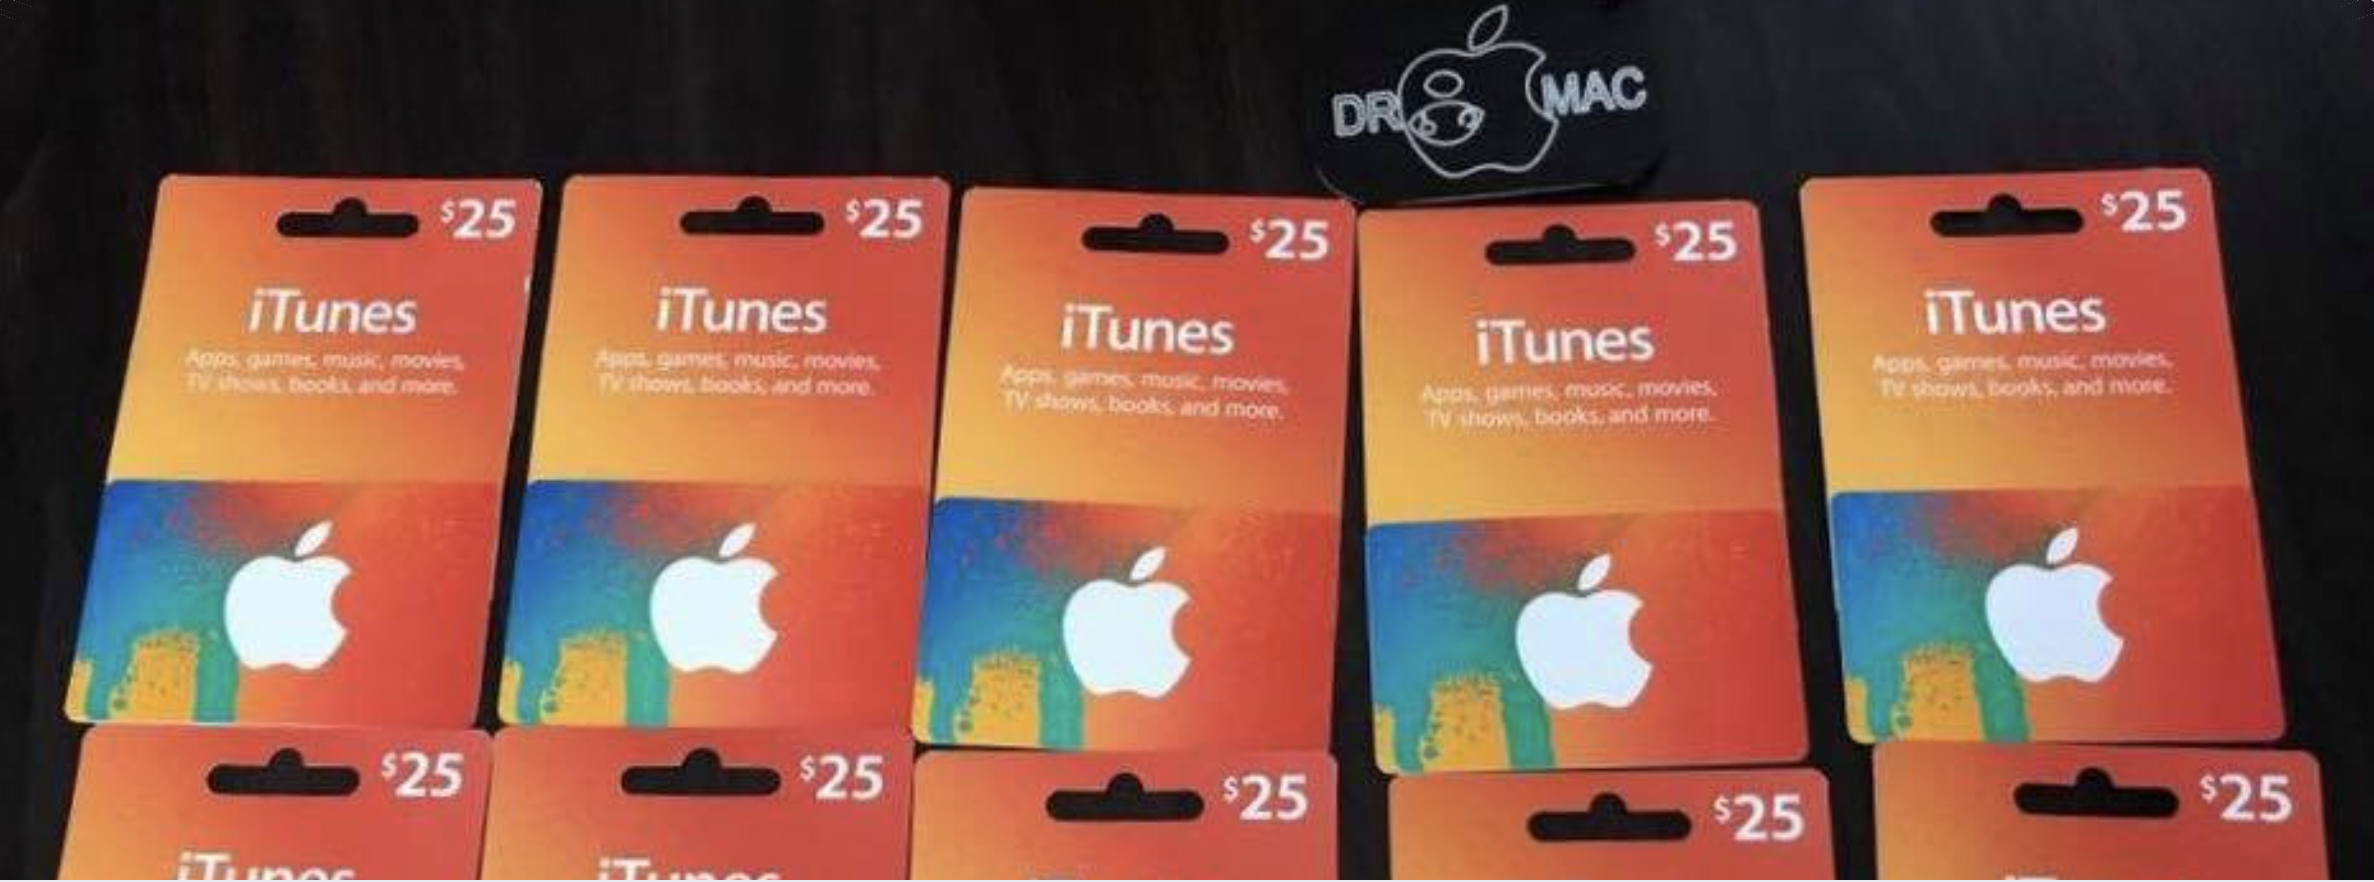 apple in store gift card redeem itune